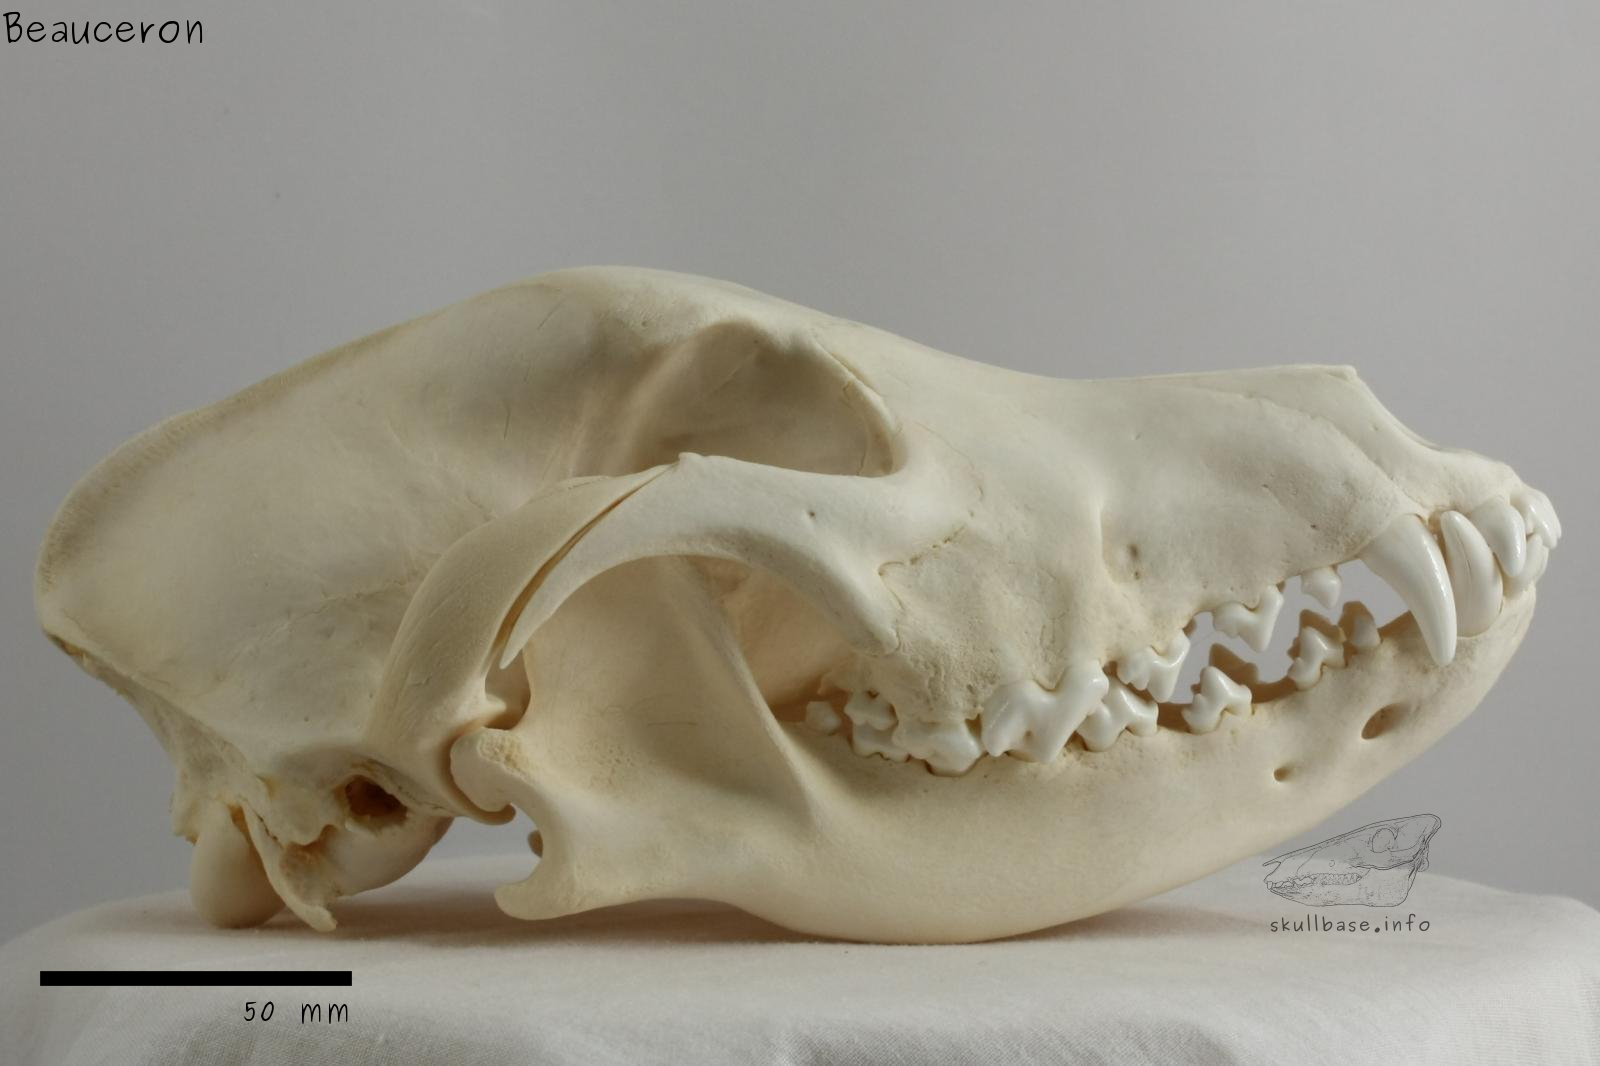 Beauceron (Canis lupus familiaris) skull lateral view